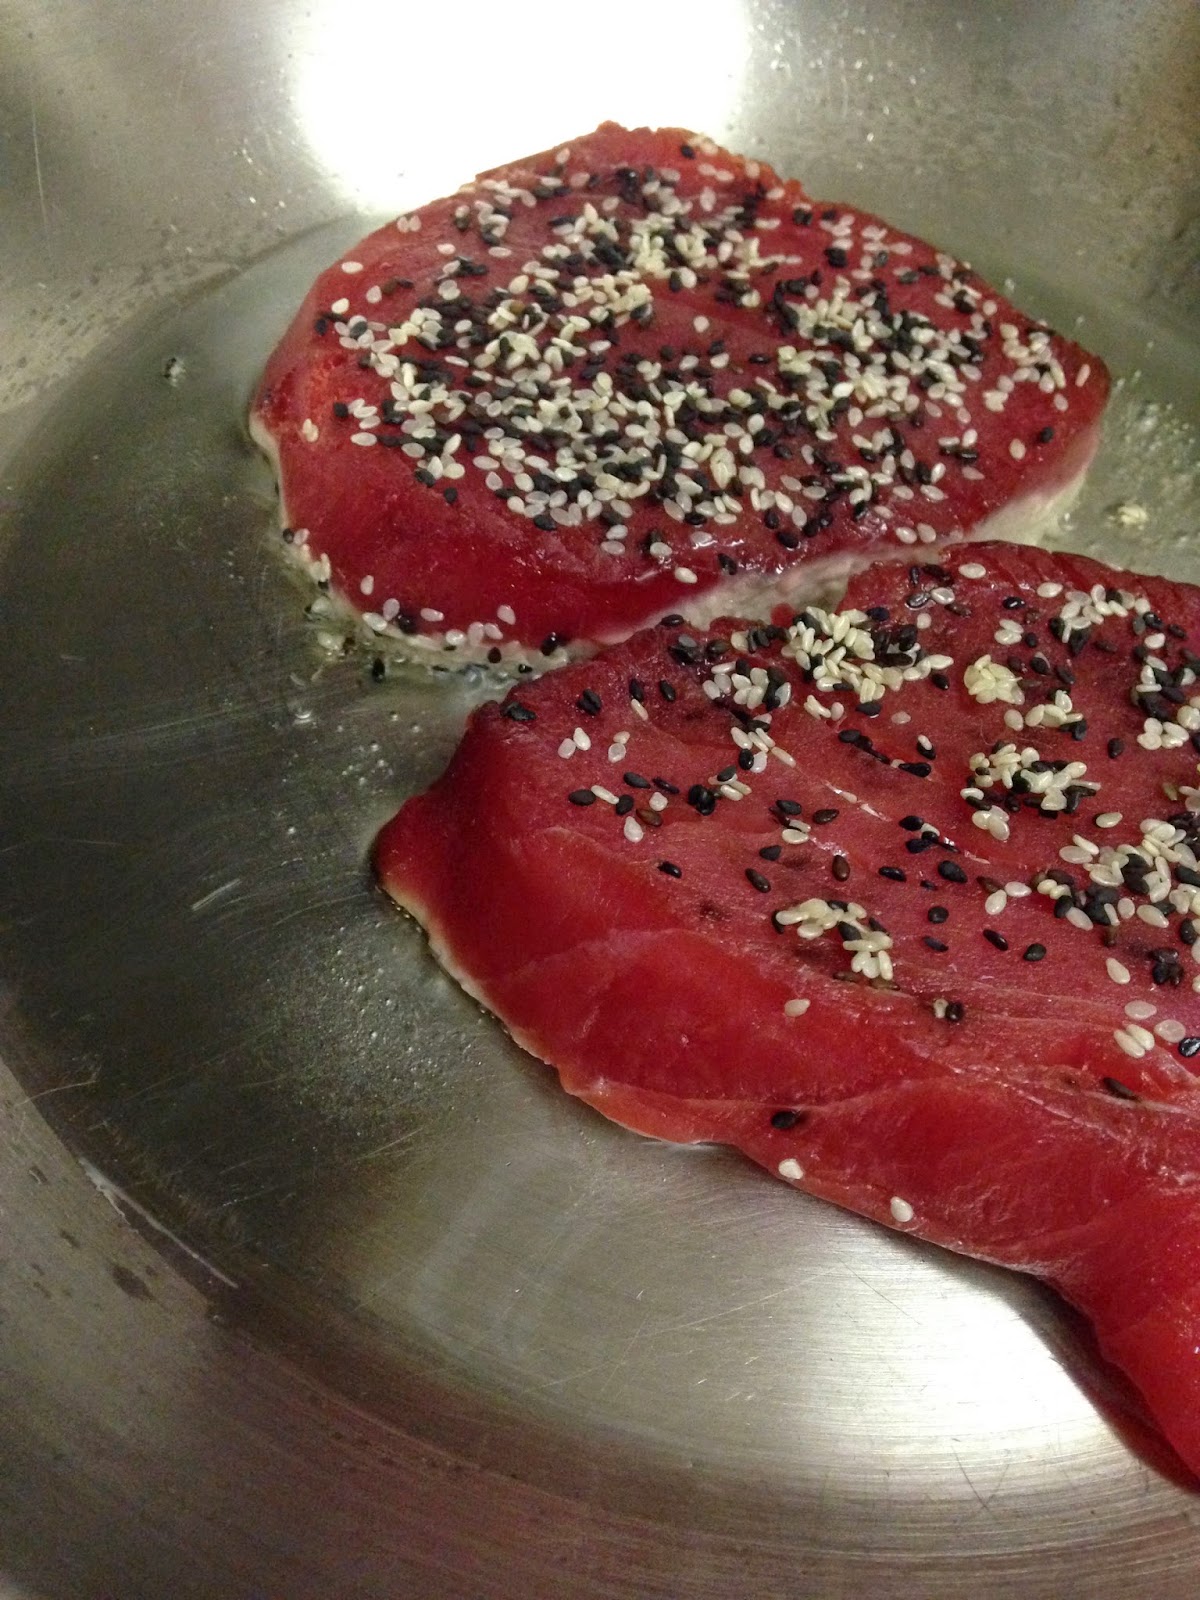 Cooking is Caring: Pan-Seared Tuna Steaks with Strawberry-Basil Chimichurri